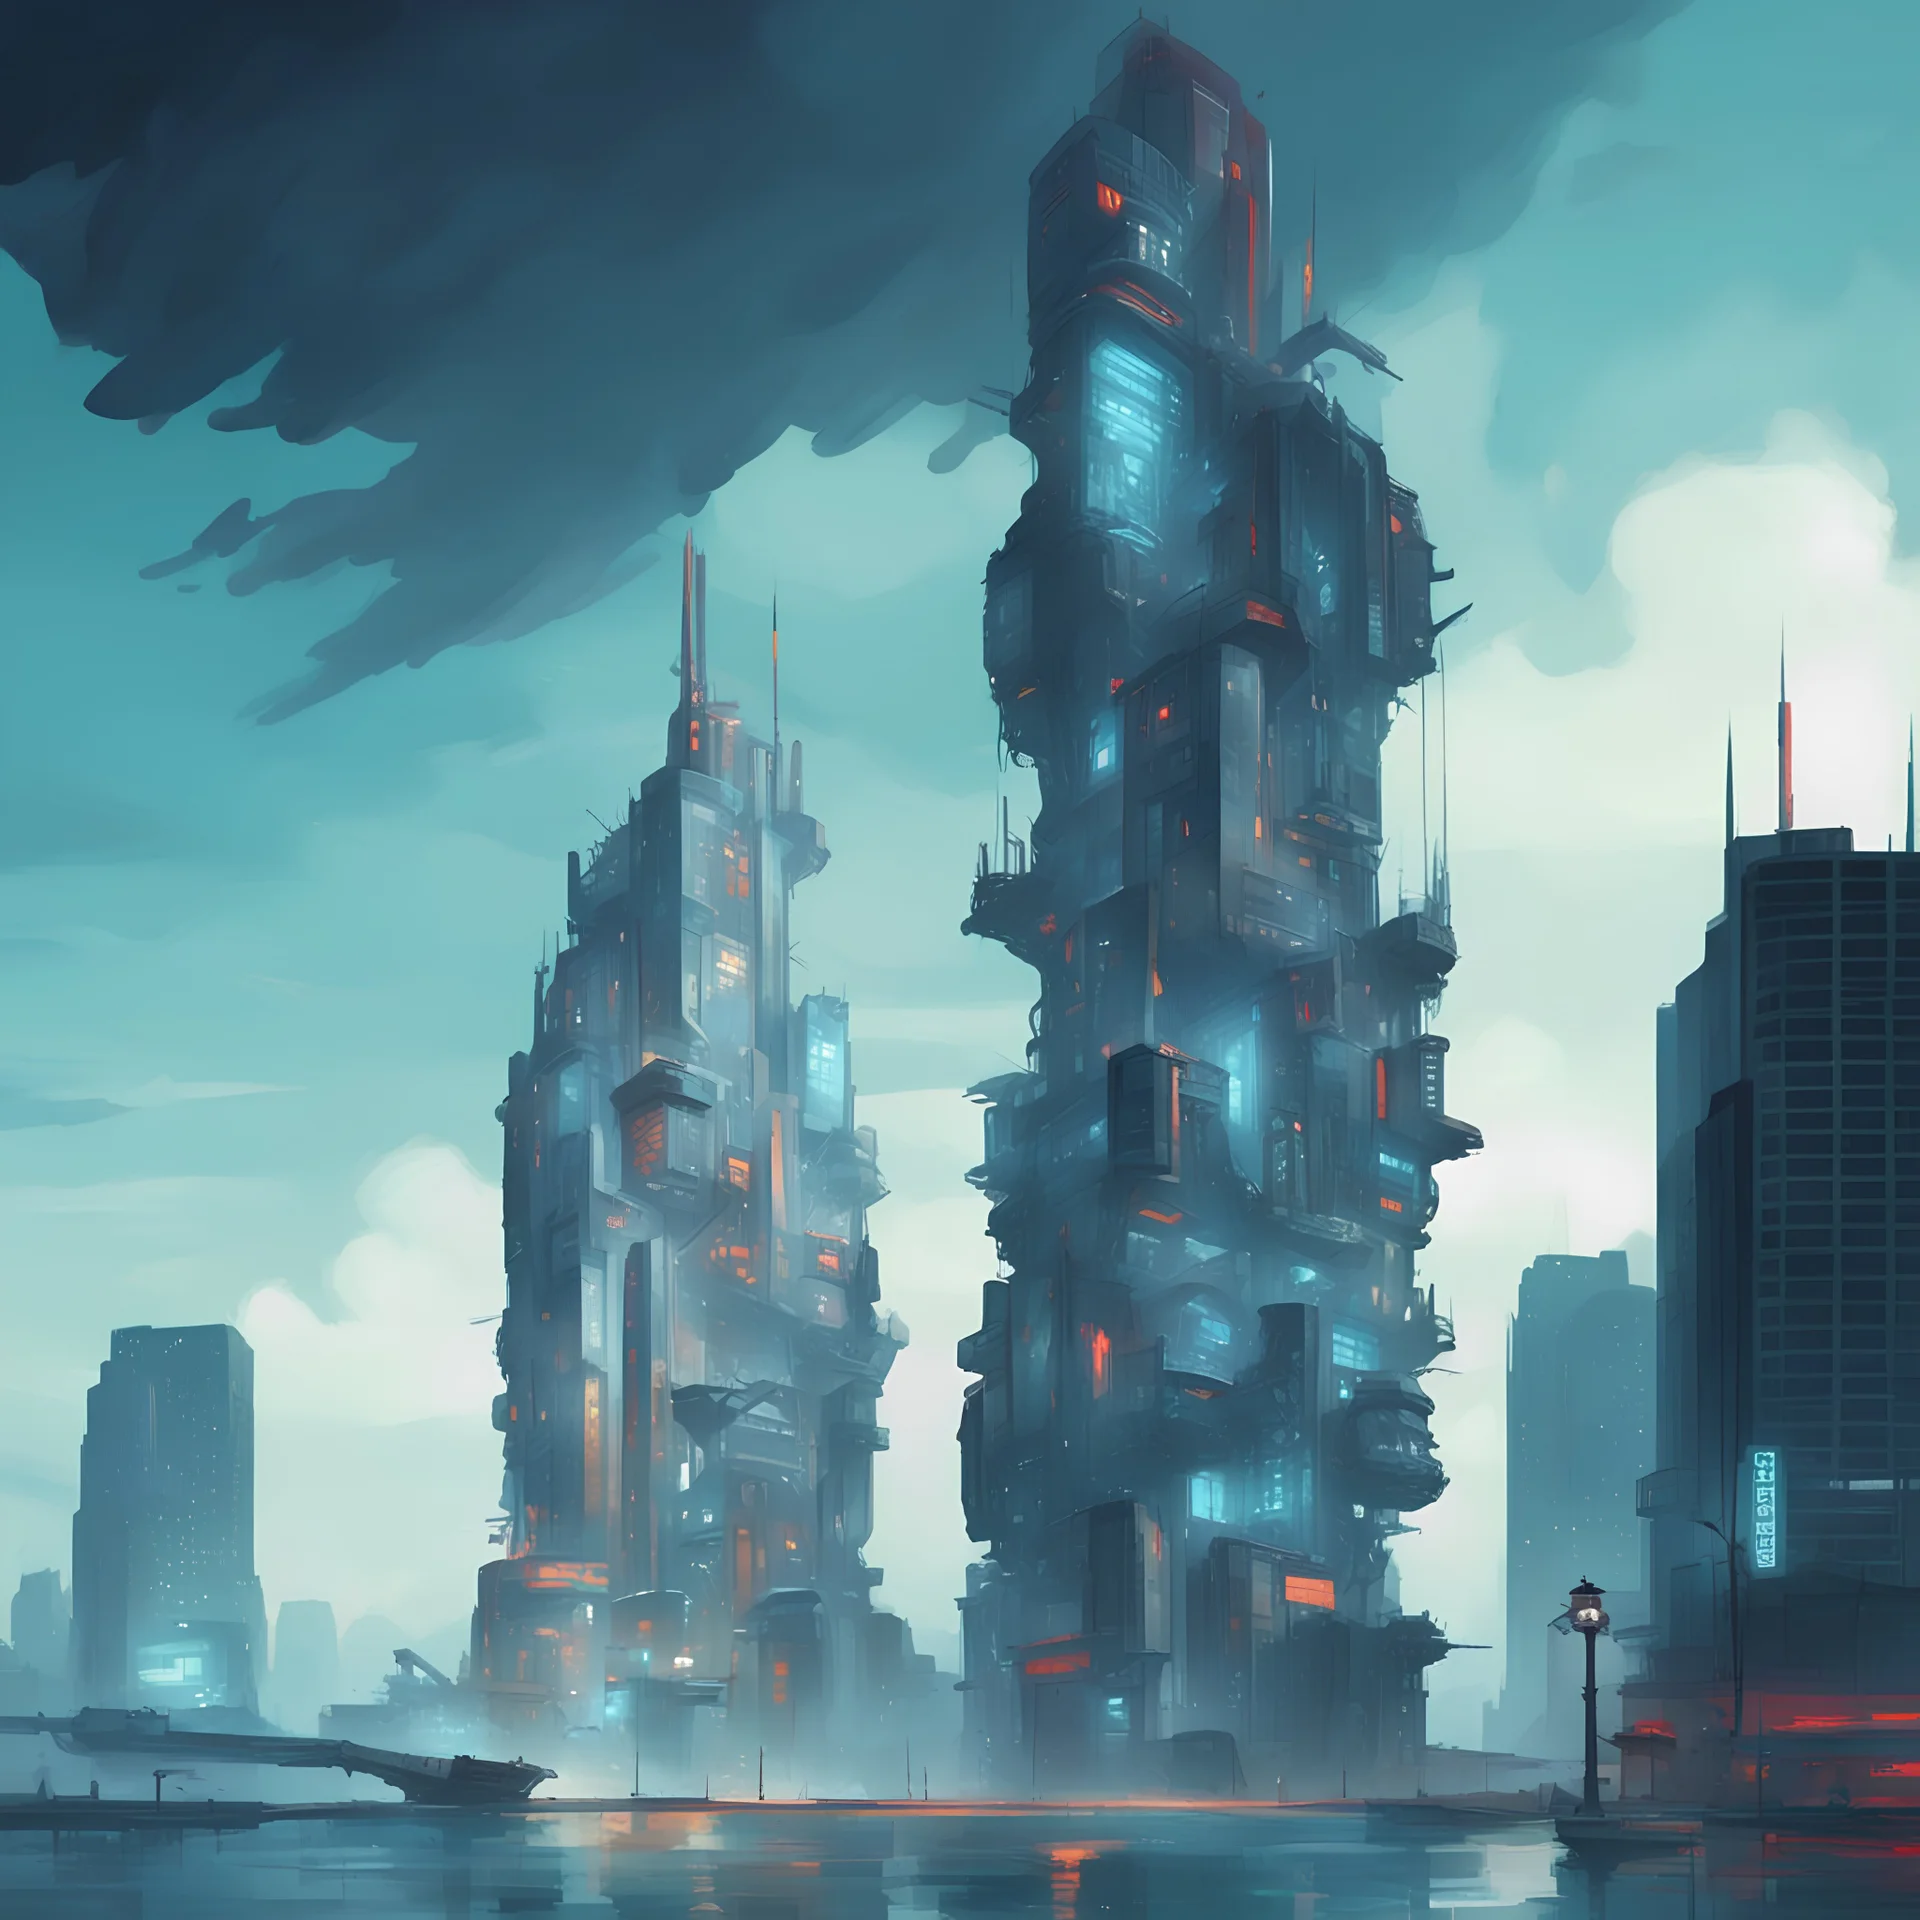 A cyberpunk style tower in red and orange